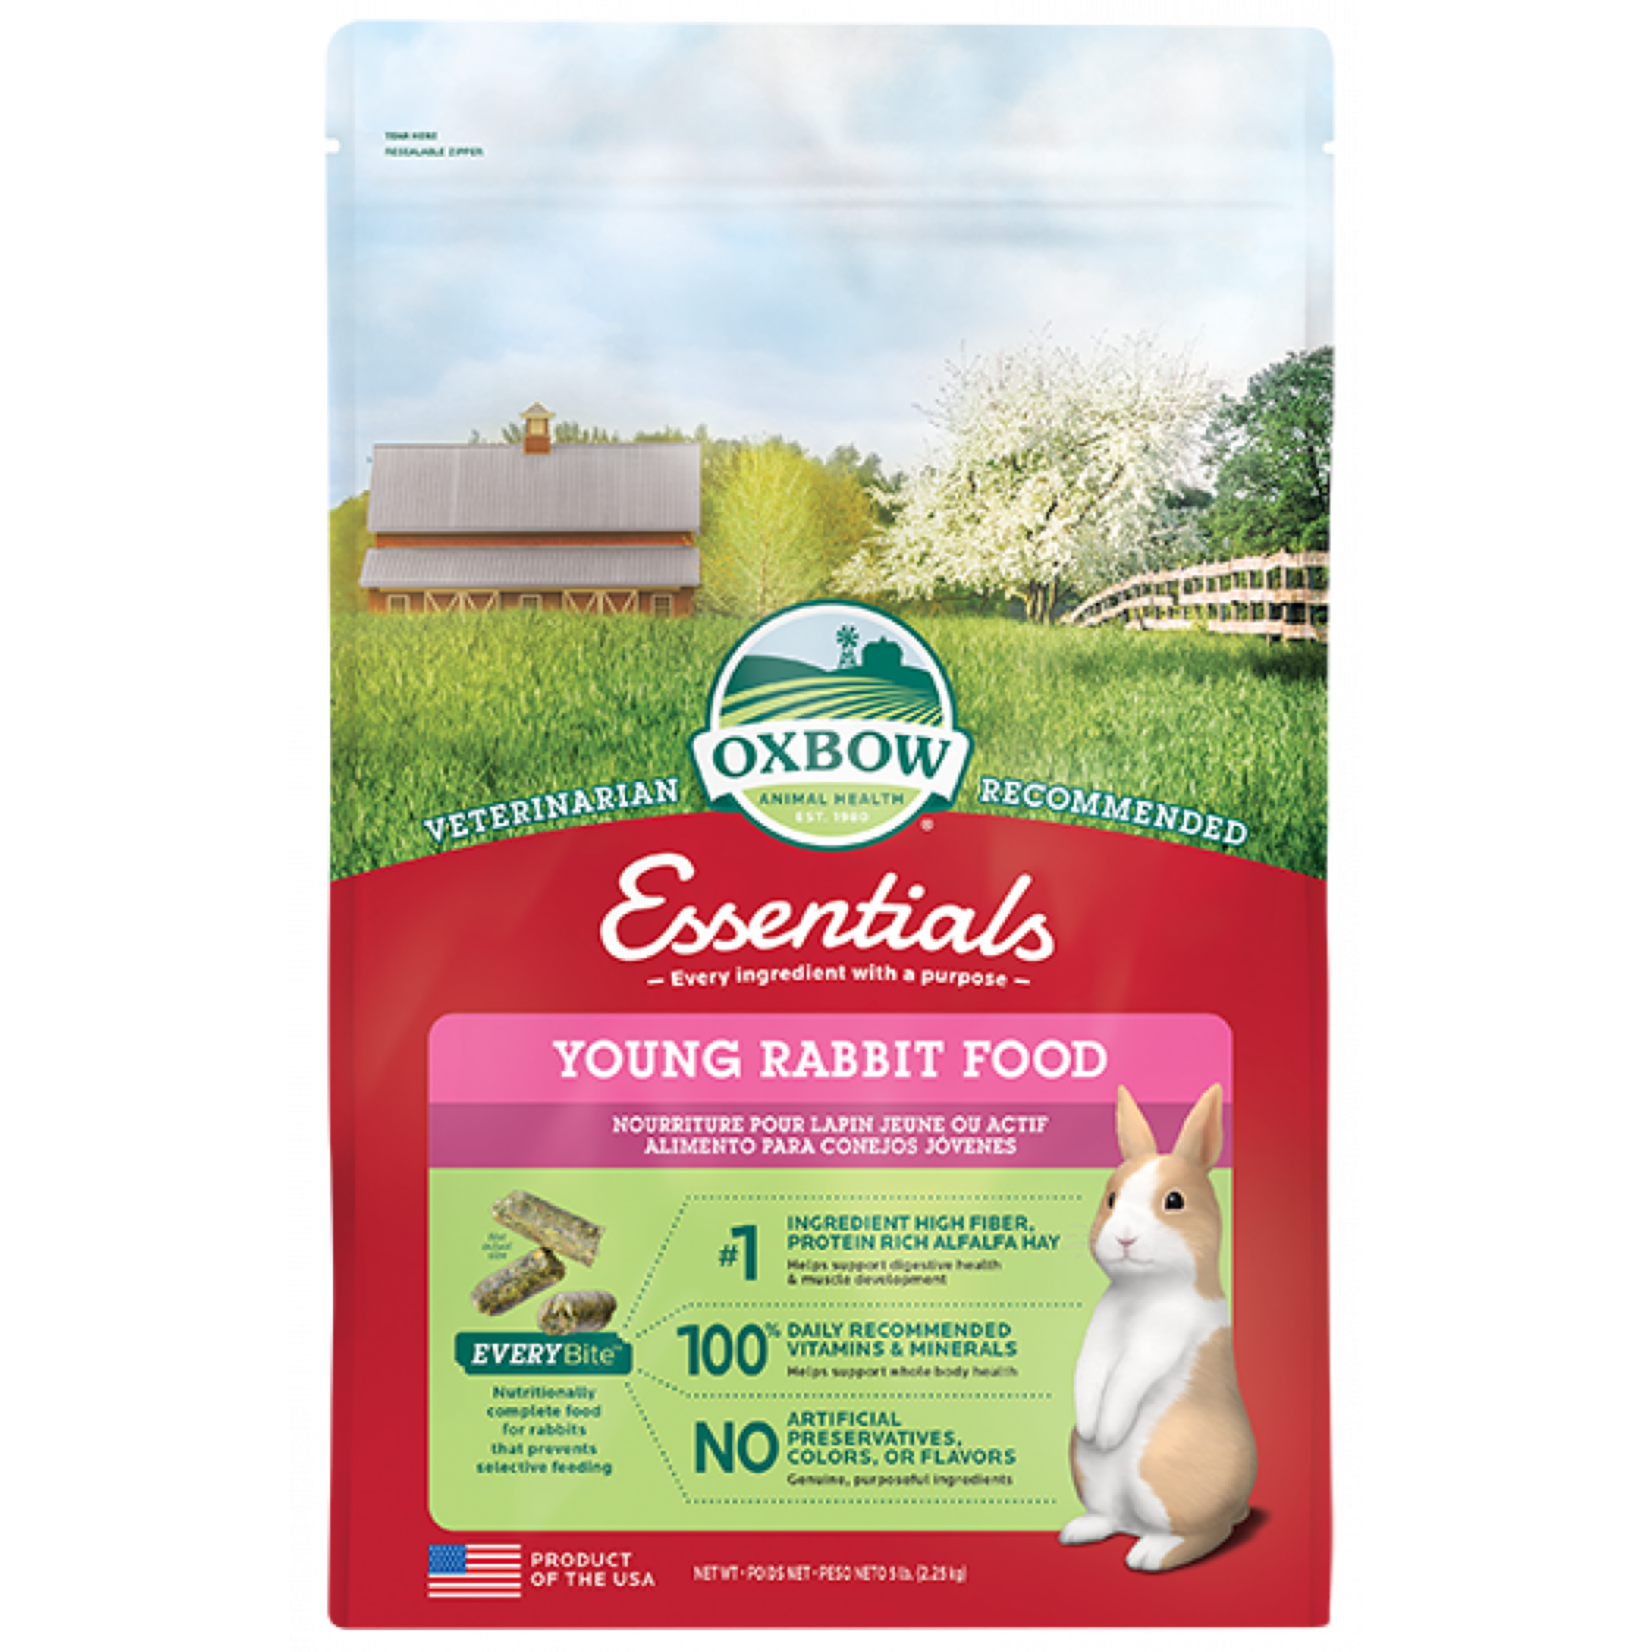 Oxbow Animal Health Oxbow Essentials Young Rabbit Food